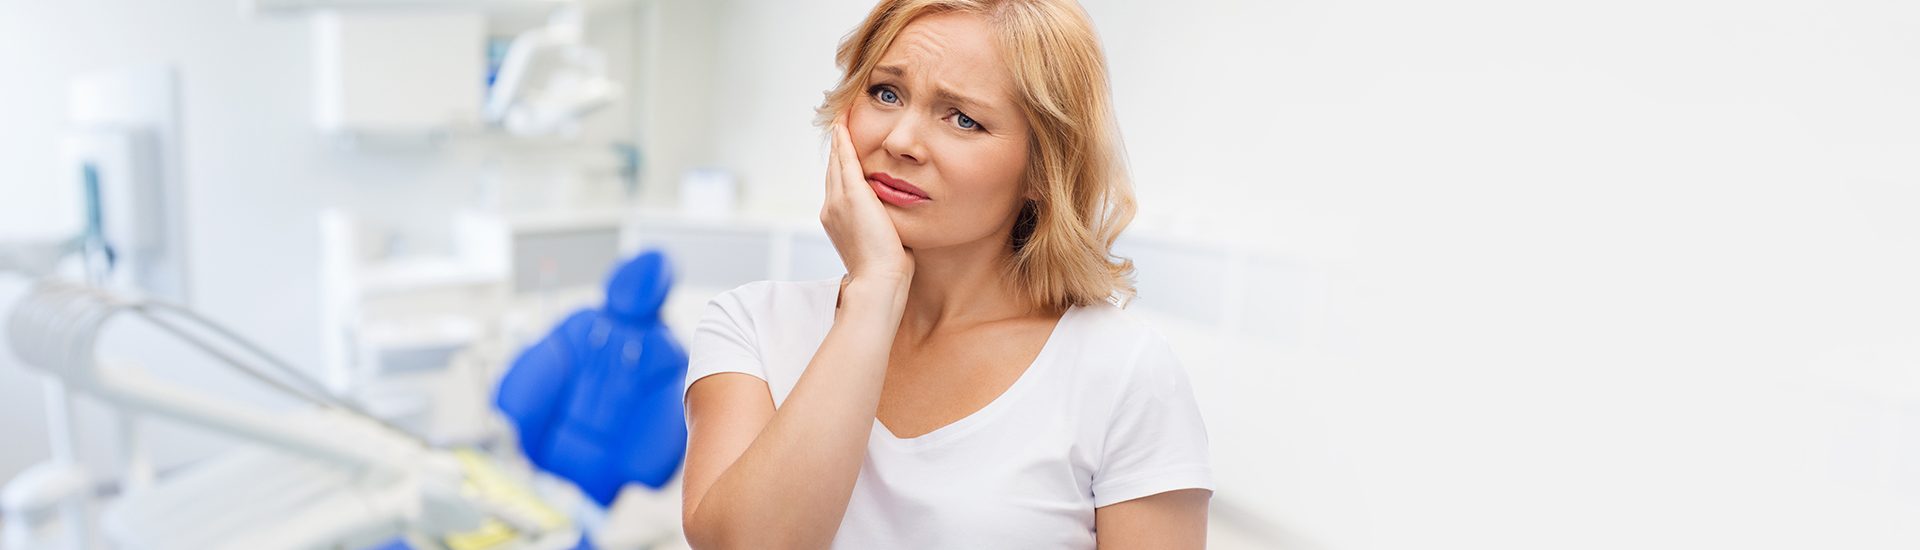 Is Getting Dental Implants Painful?